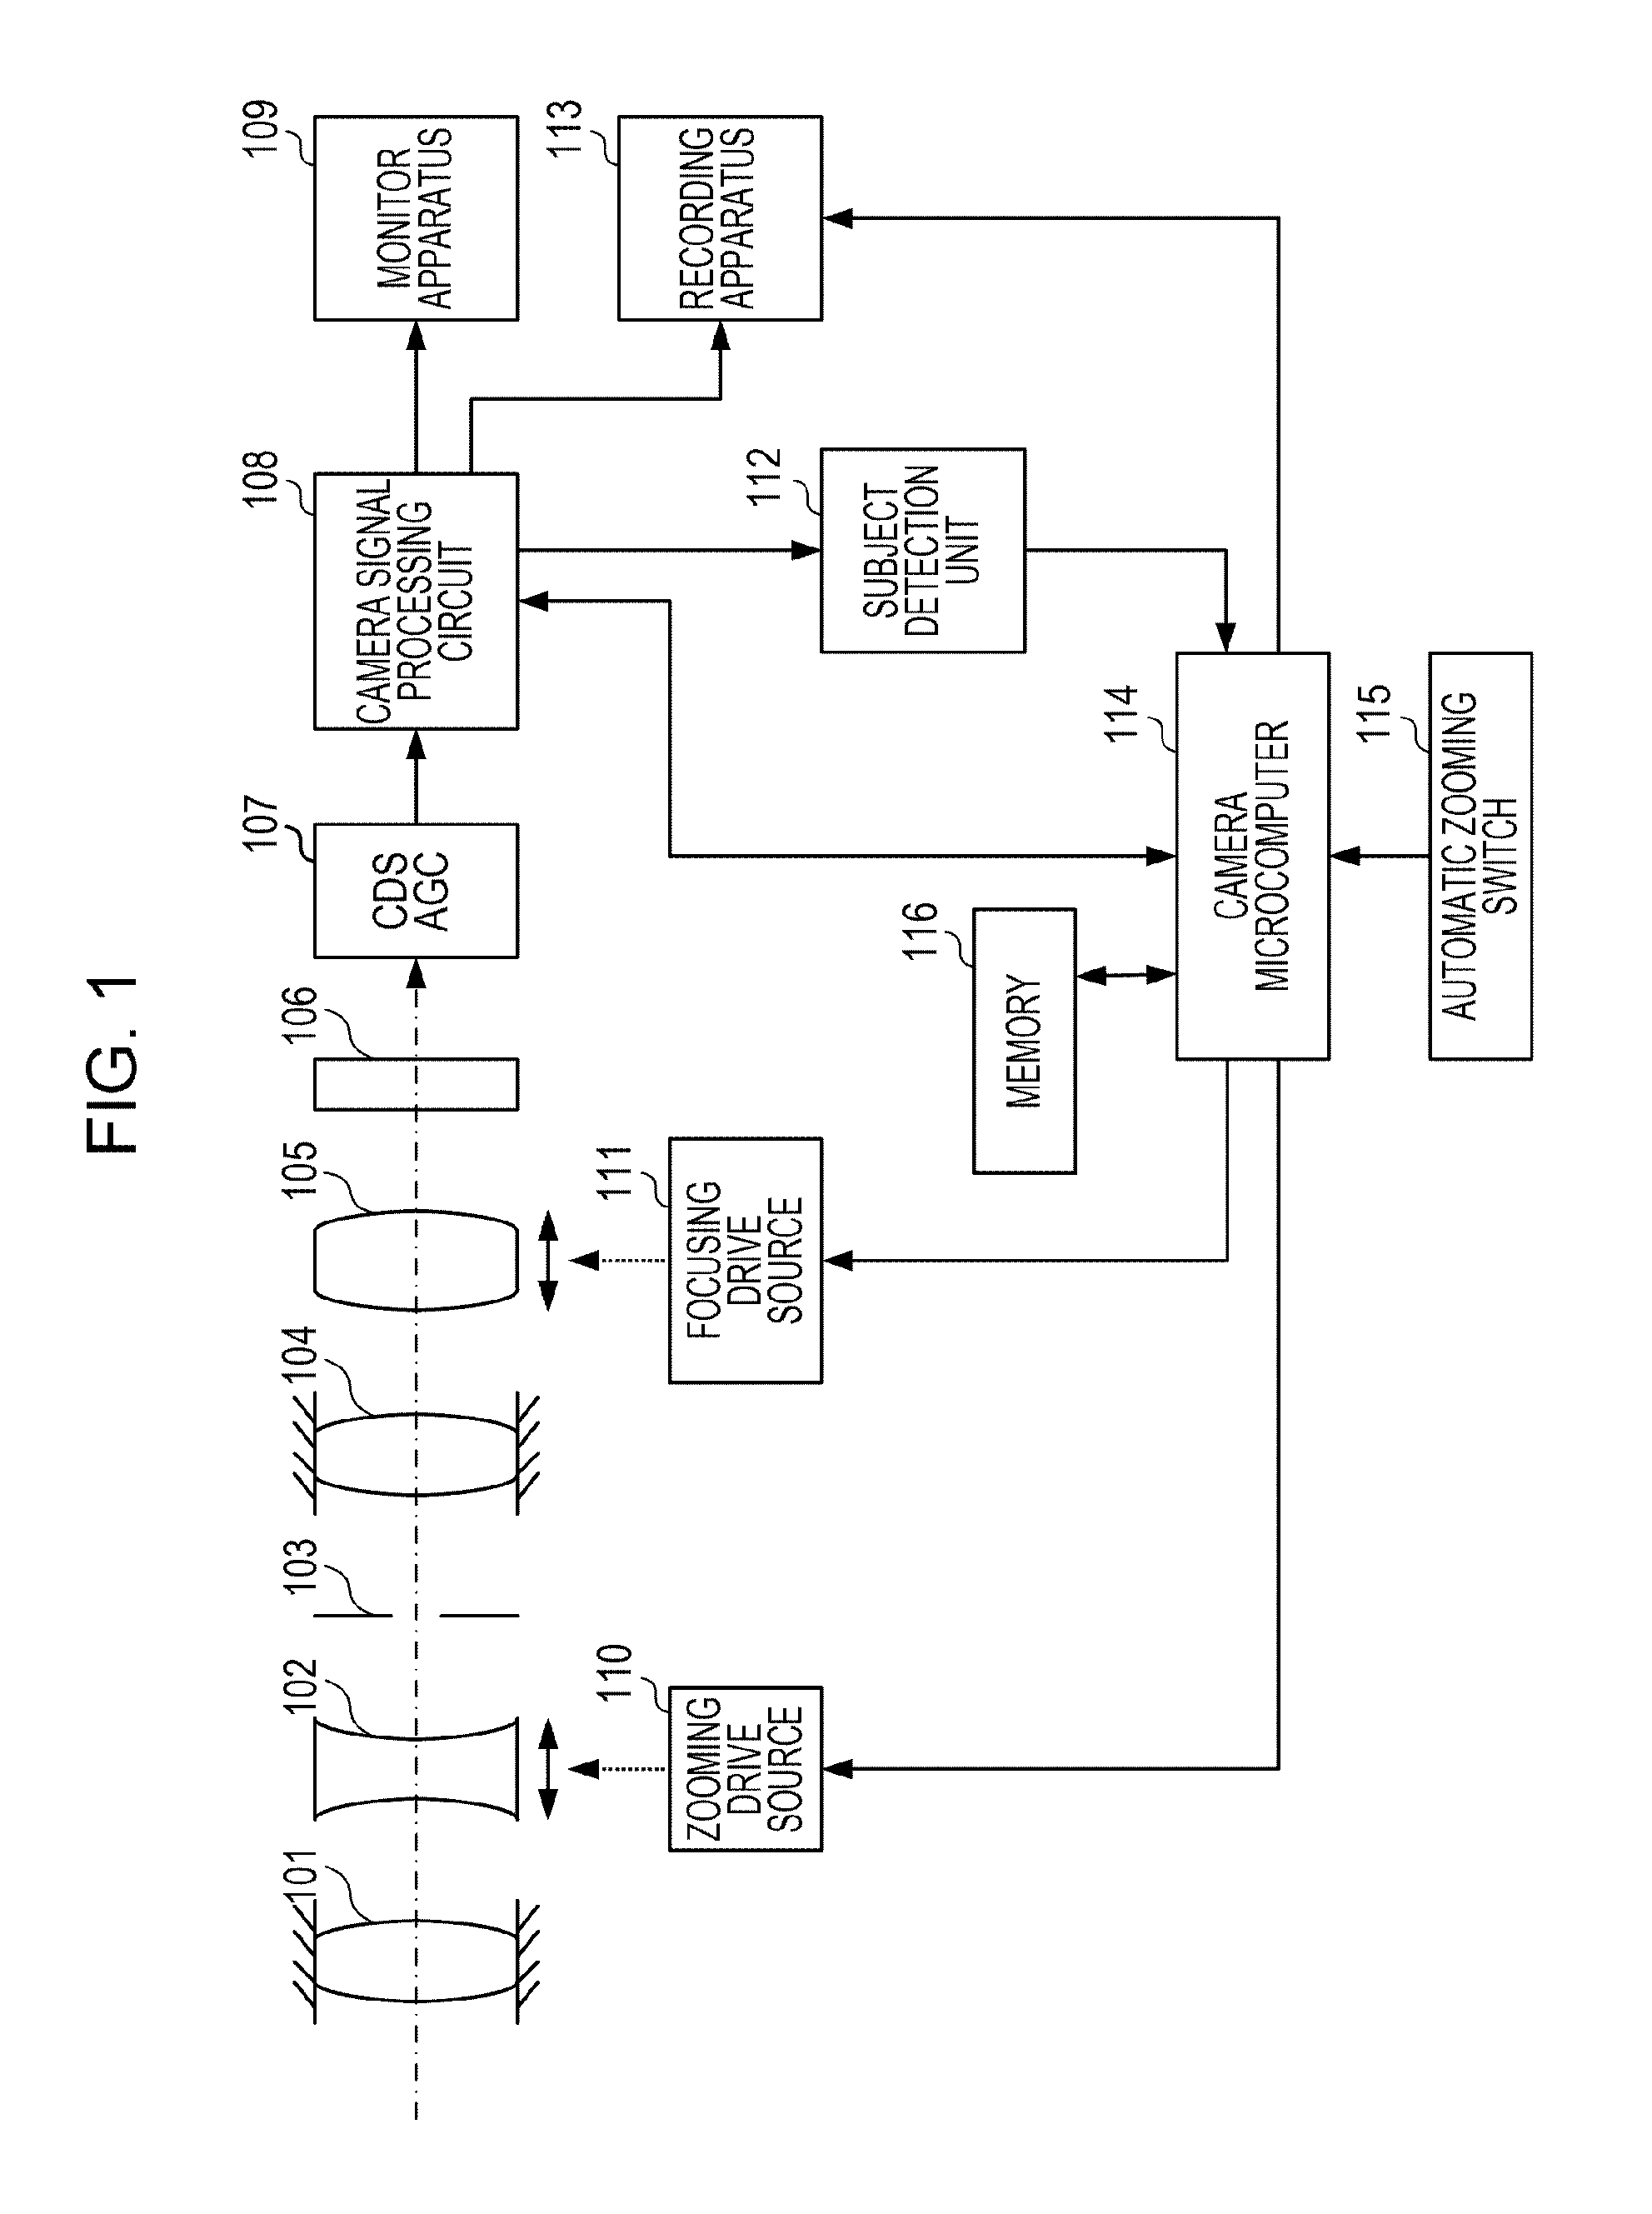 Image pickup apparatus and method of controlling the same